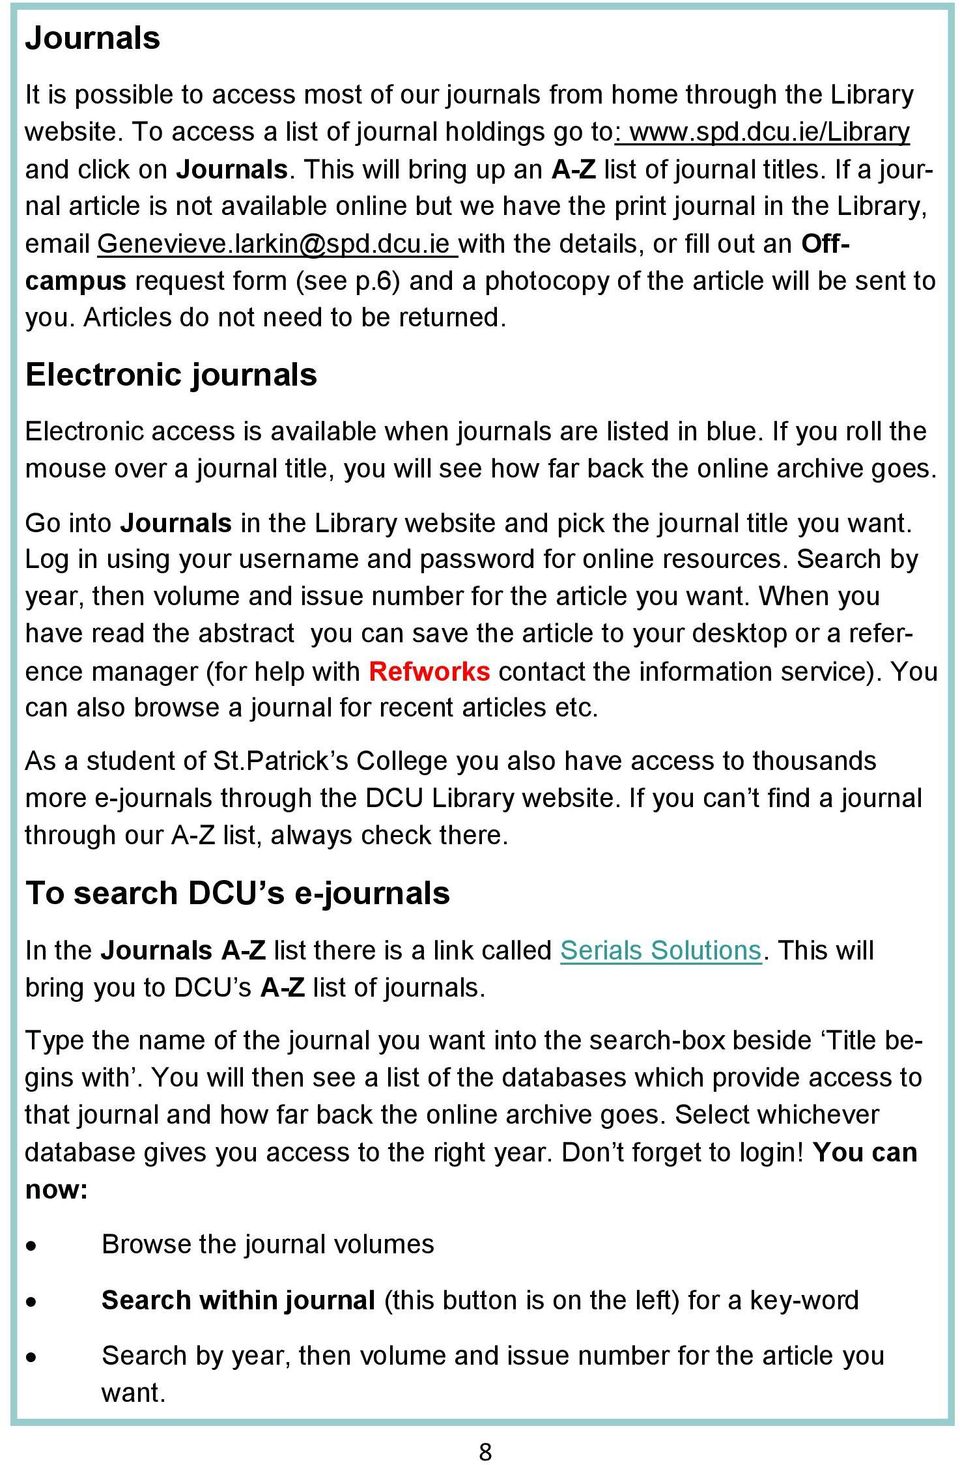 ie with the details, or fill out an Offcampus request form (see p.6) and a photocopy of the article will be sent to you. Articles do not need to be returned.